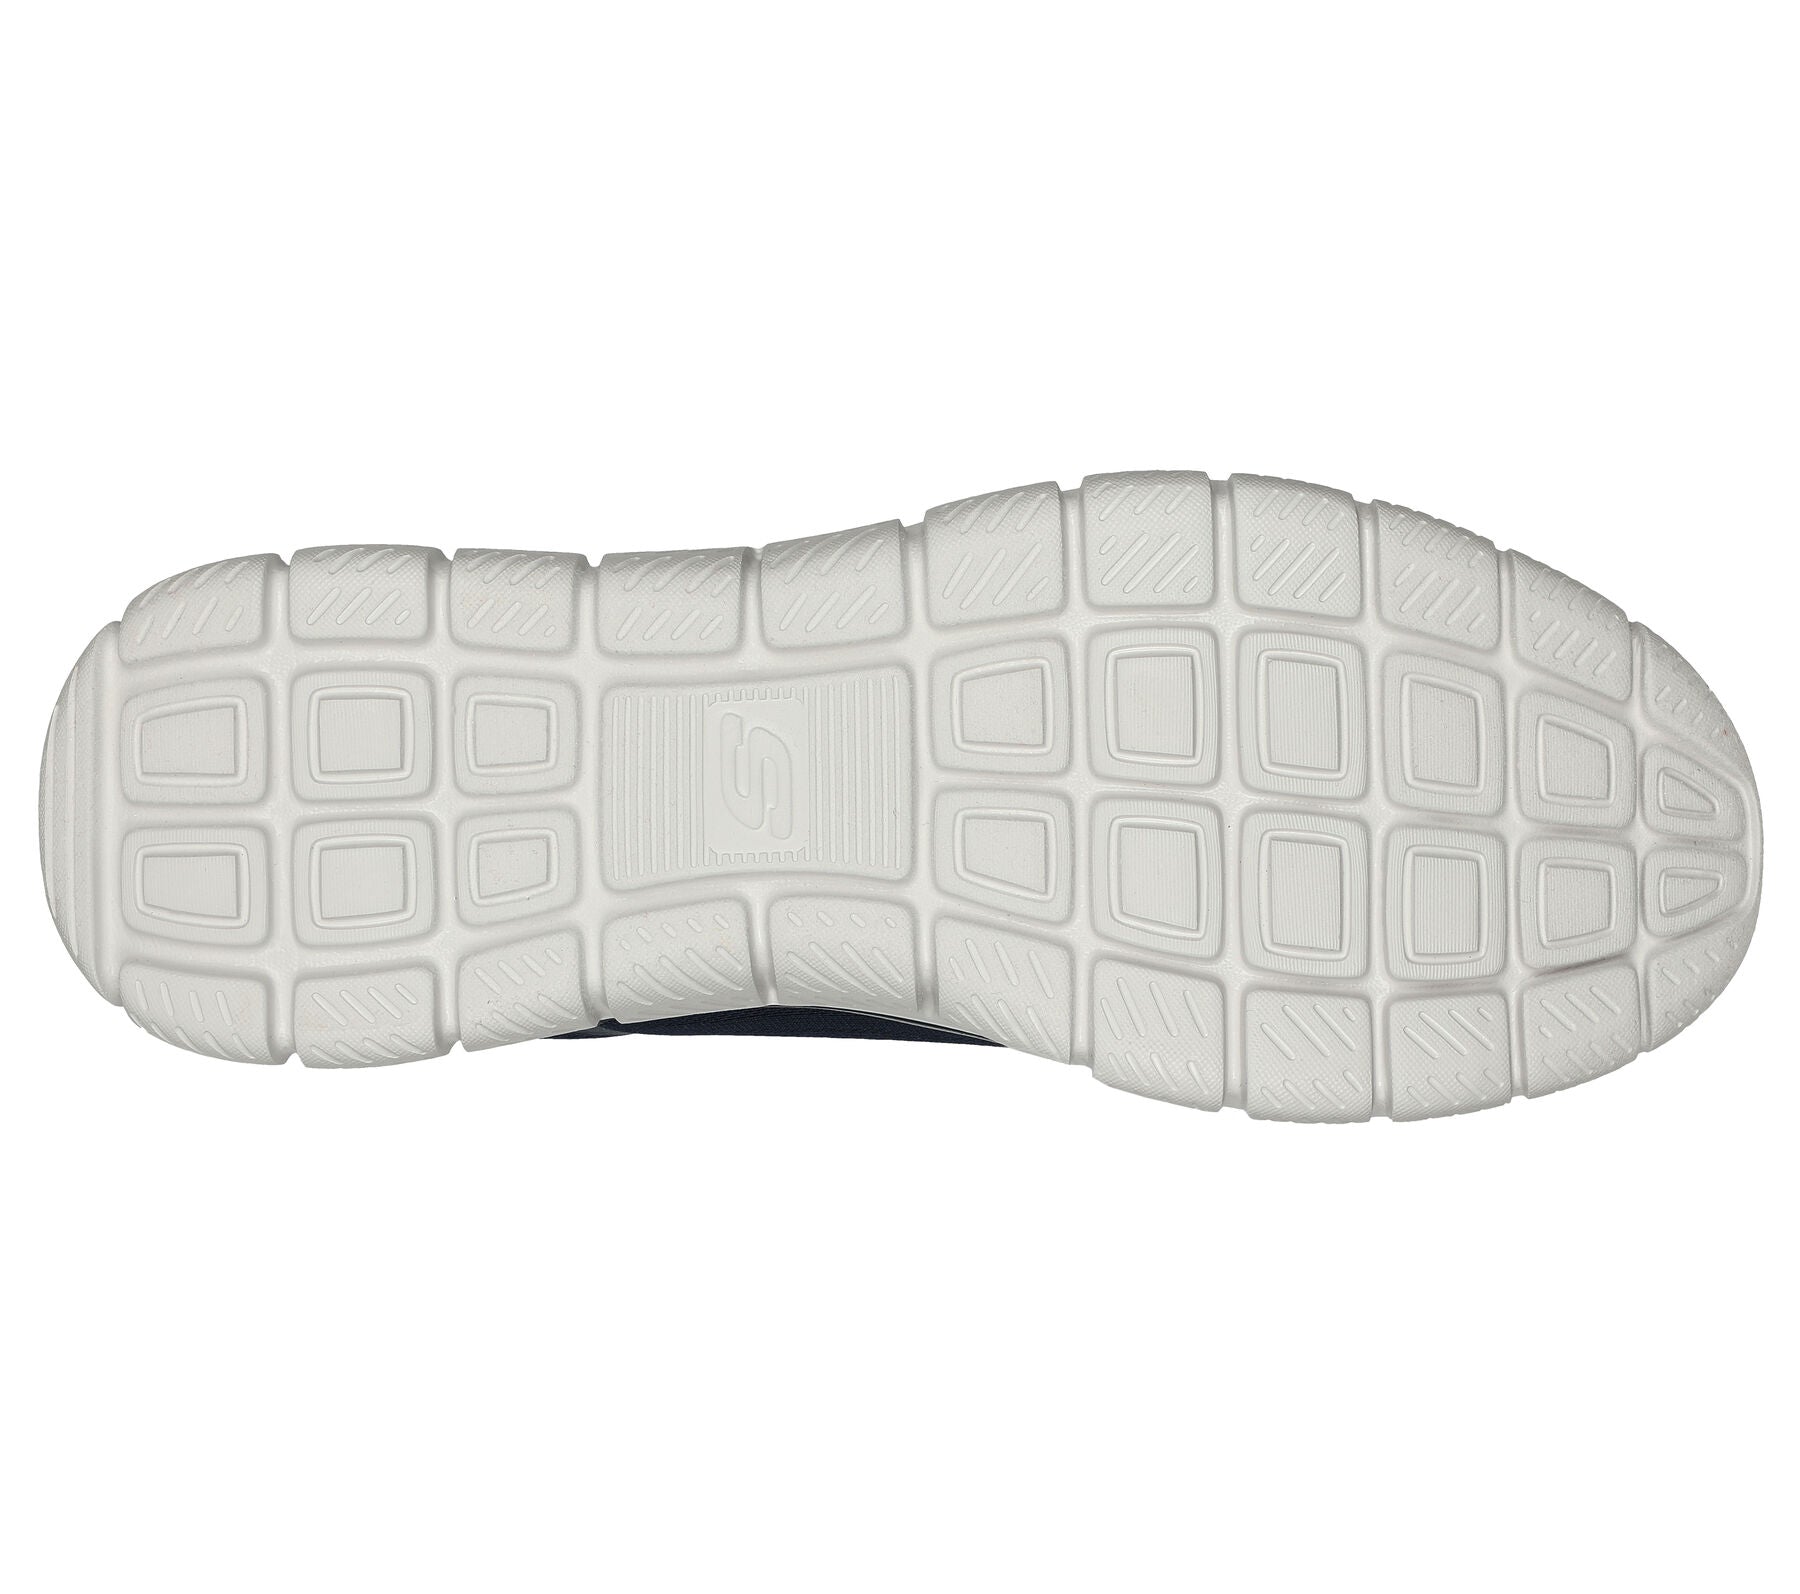 Side view showing the flexible cushioned midsole and traction outsole.